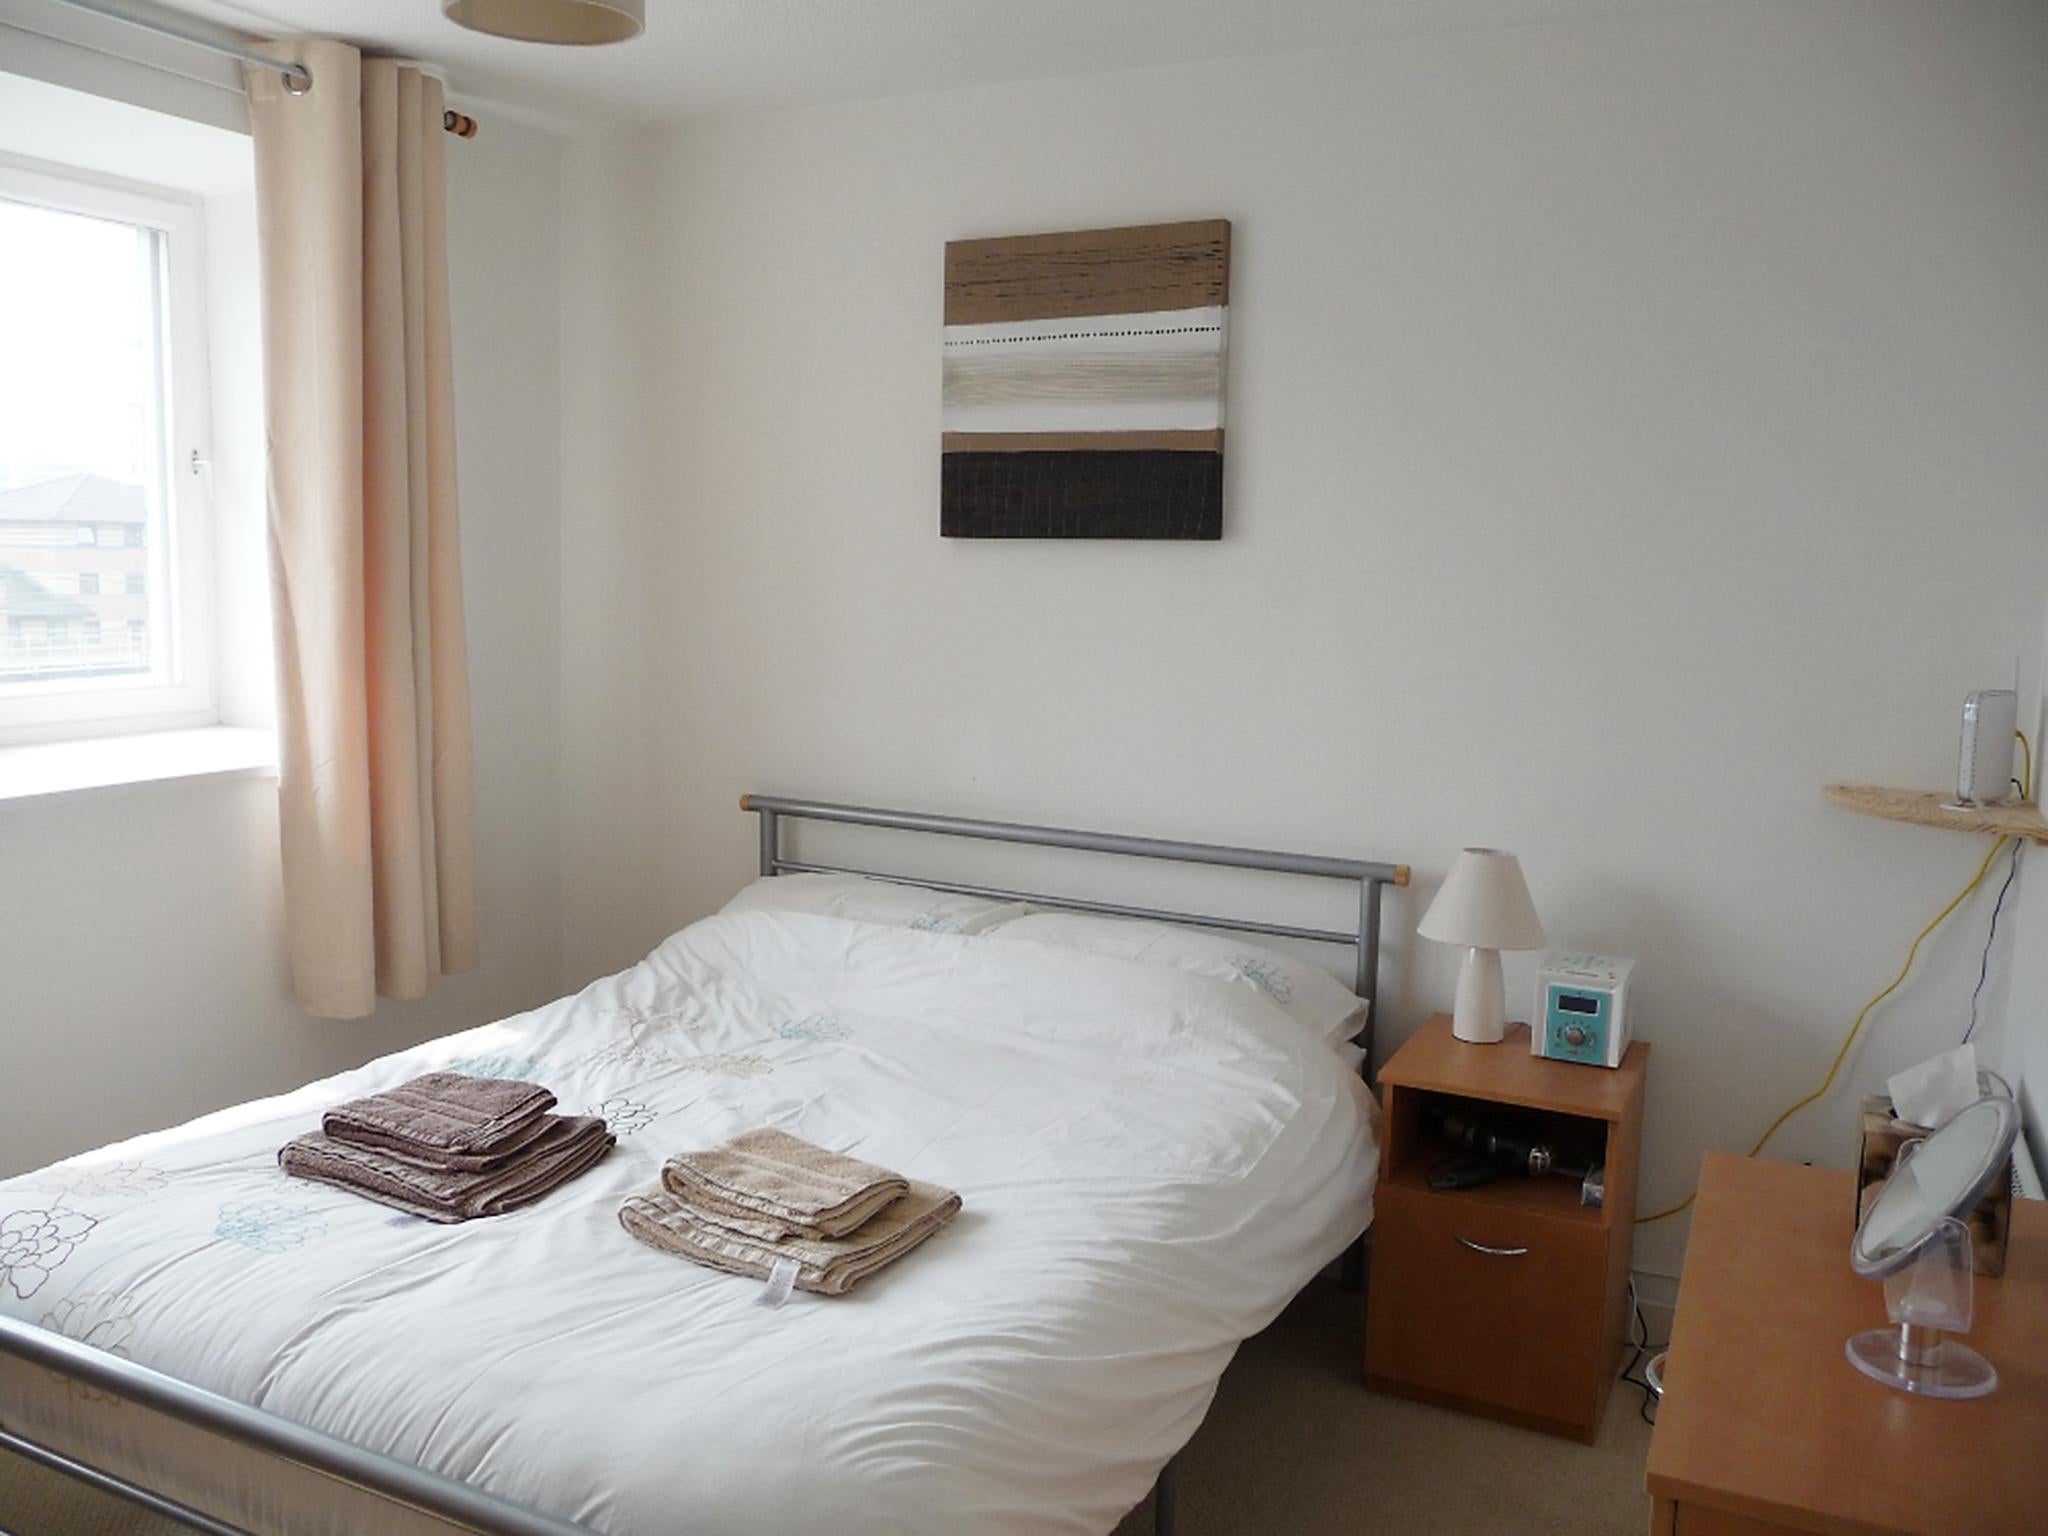 The flat can be rented for £75 a night or £350 a week